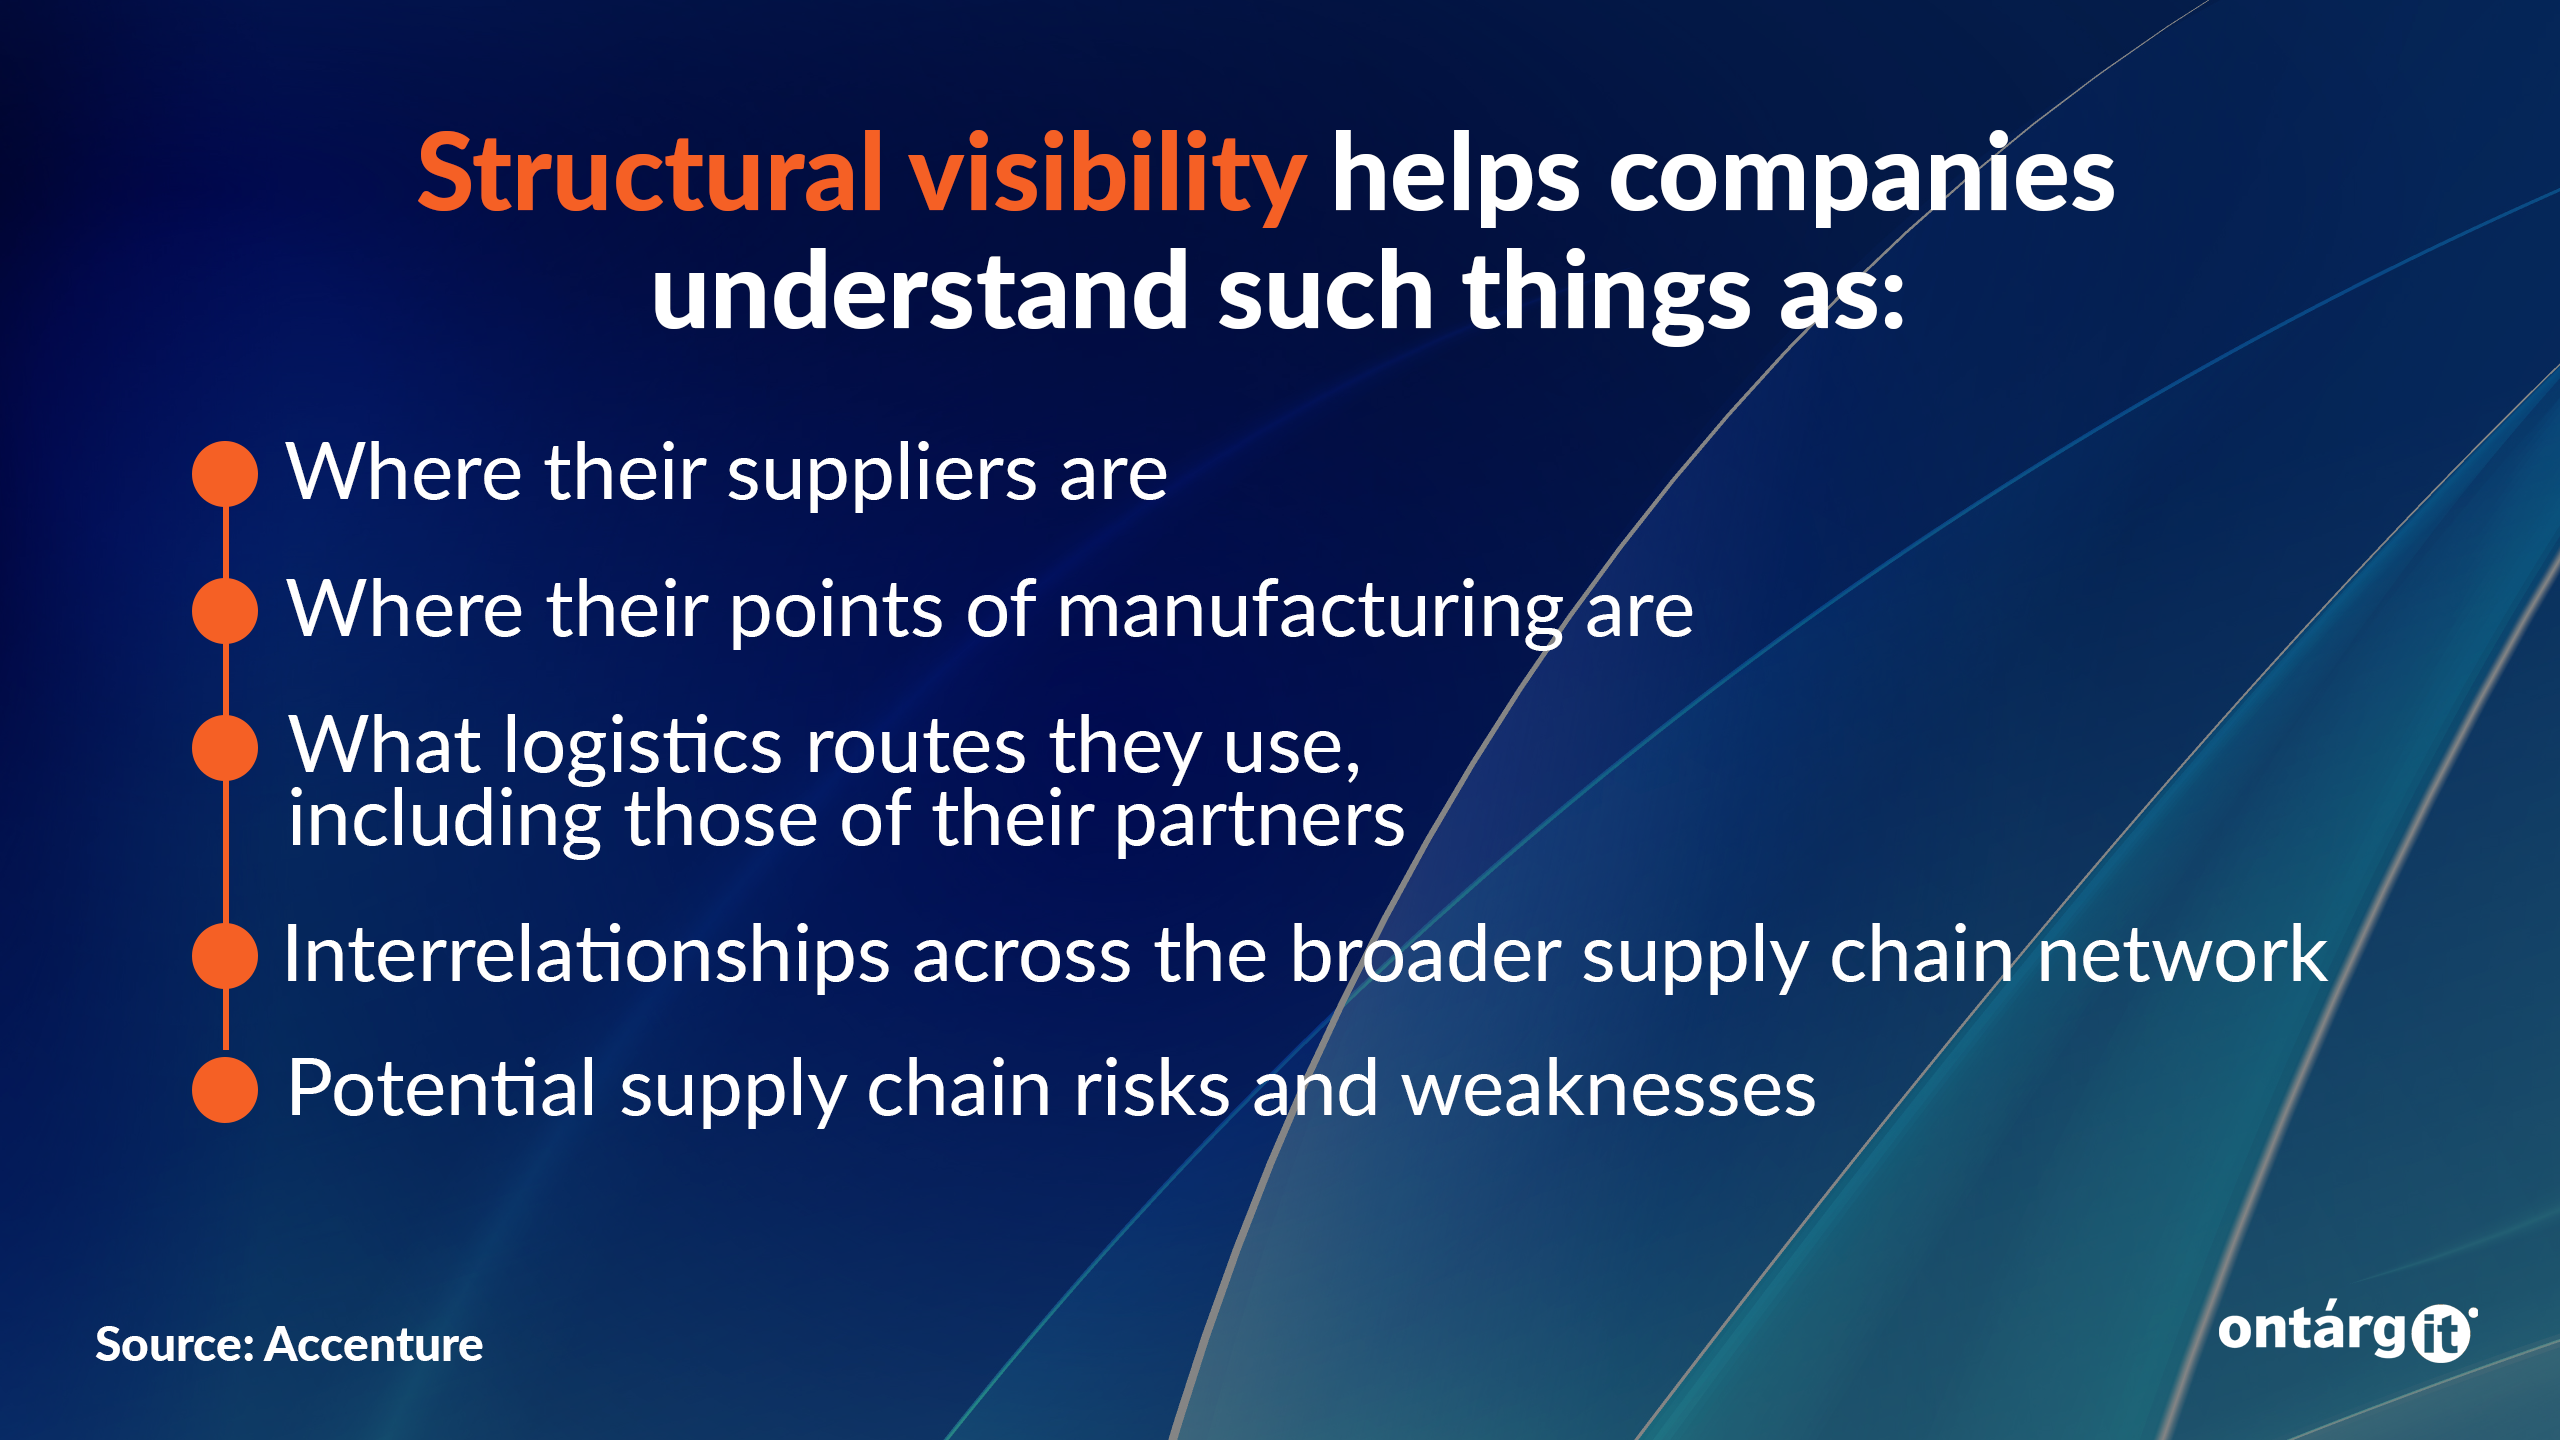 Structural visibility helps companies understand such things as:  Where their suppliers are  Where their points of manufacturing are  What logistics routes they use, including those of their partners  Interrelationships across the broader supply chain network  Potential supply chain risks and weaknesses